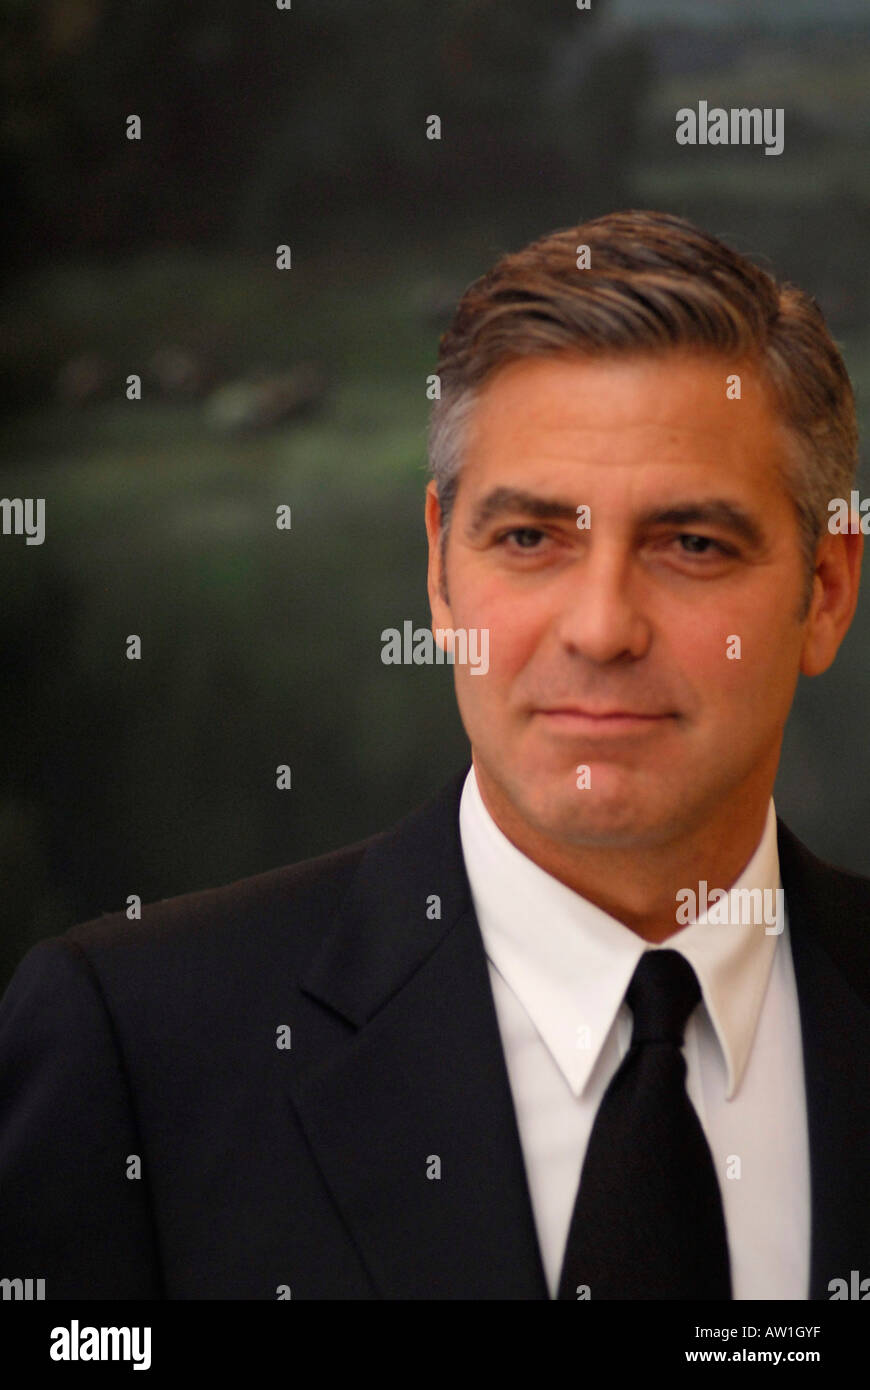 New York NY November 1 2006 Award winning actor and director GEORGE CLOONEY The Interfaith Alliance presented him with his Walte Stock Photo